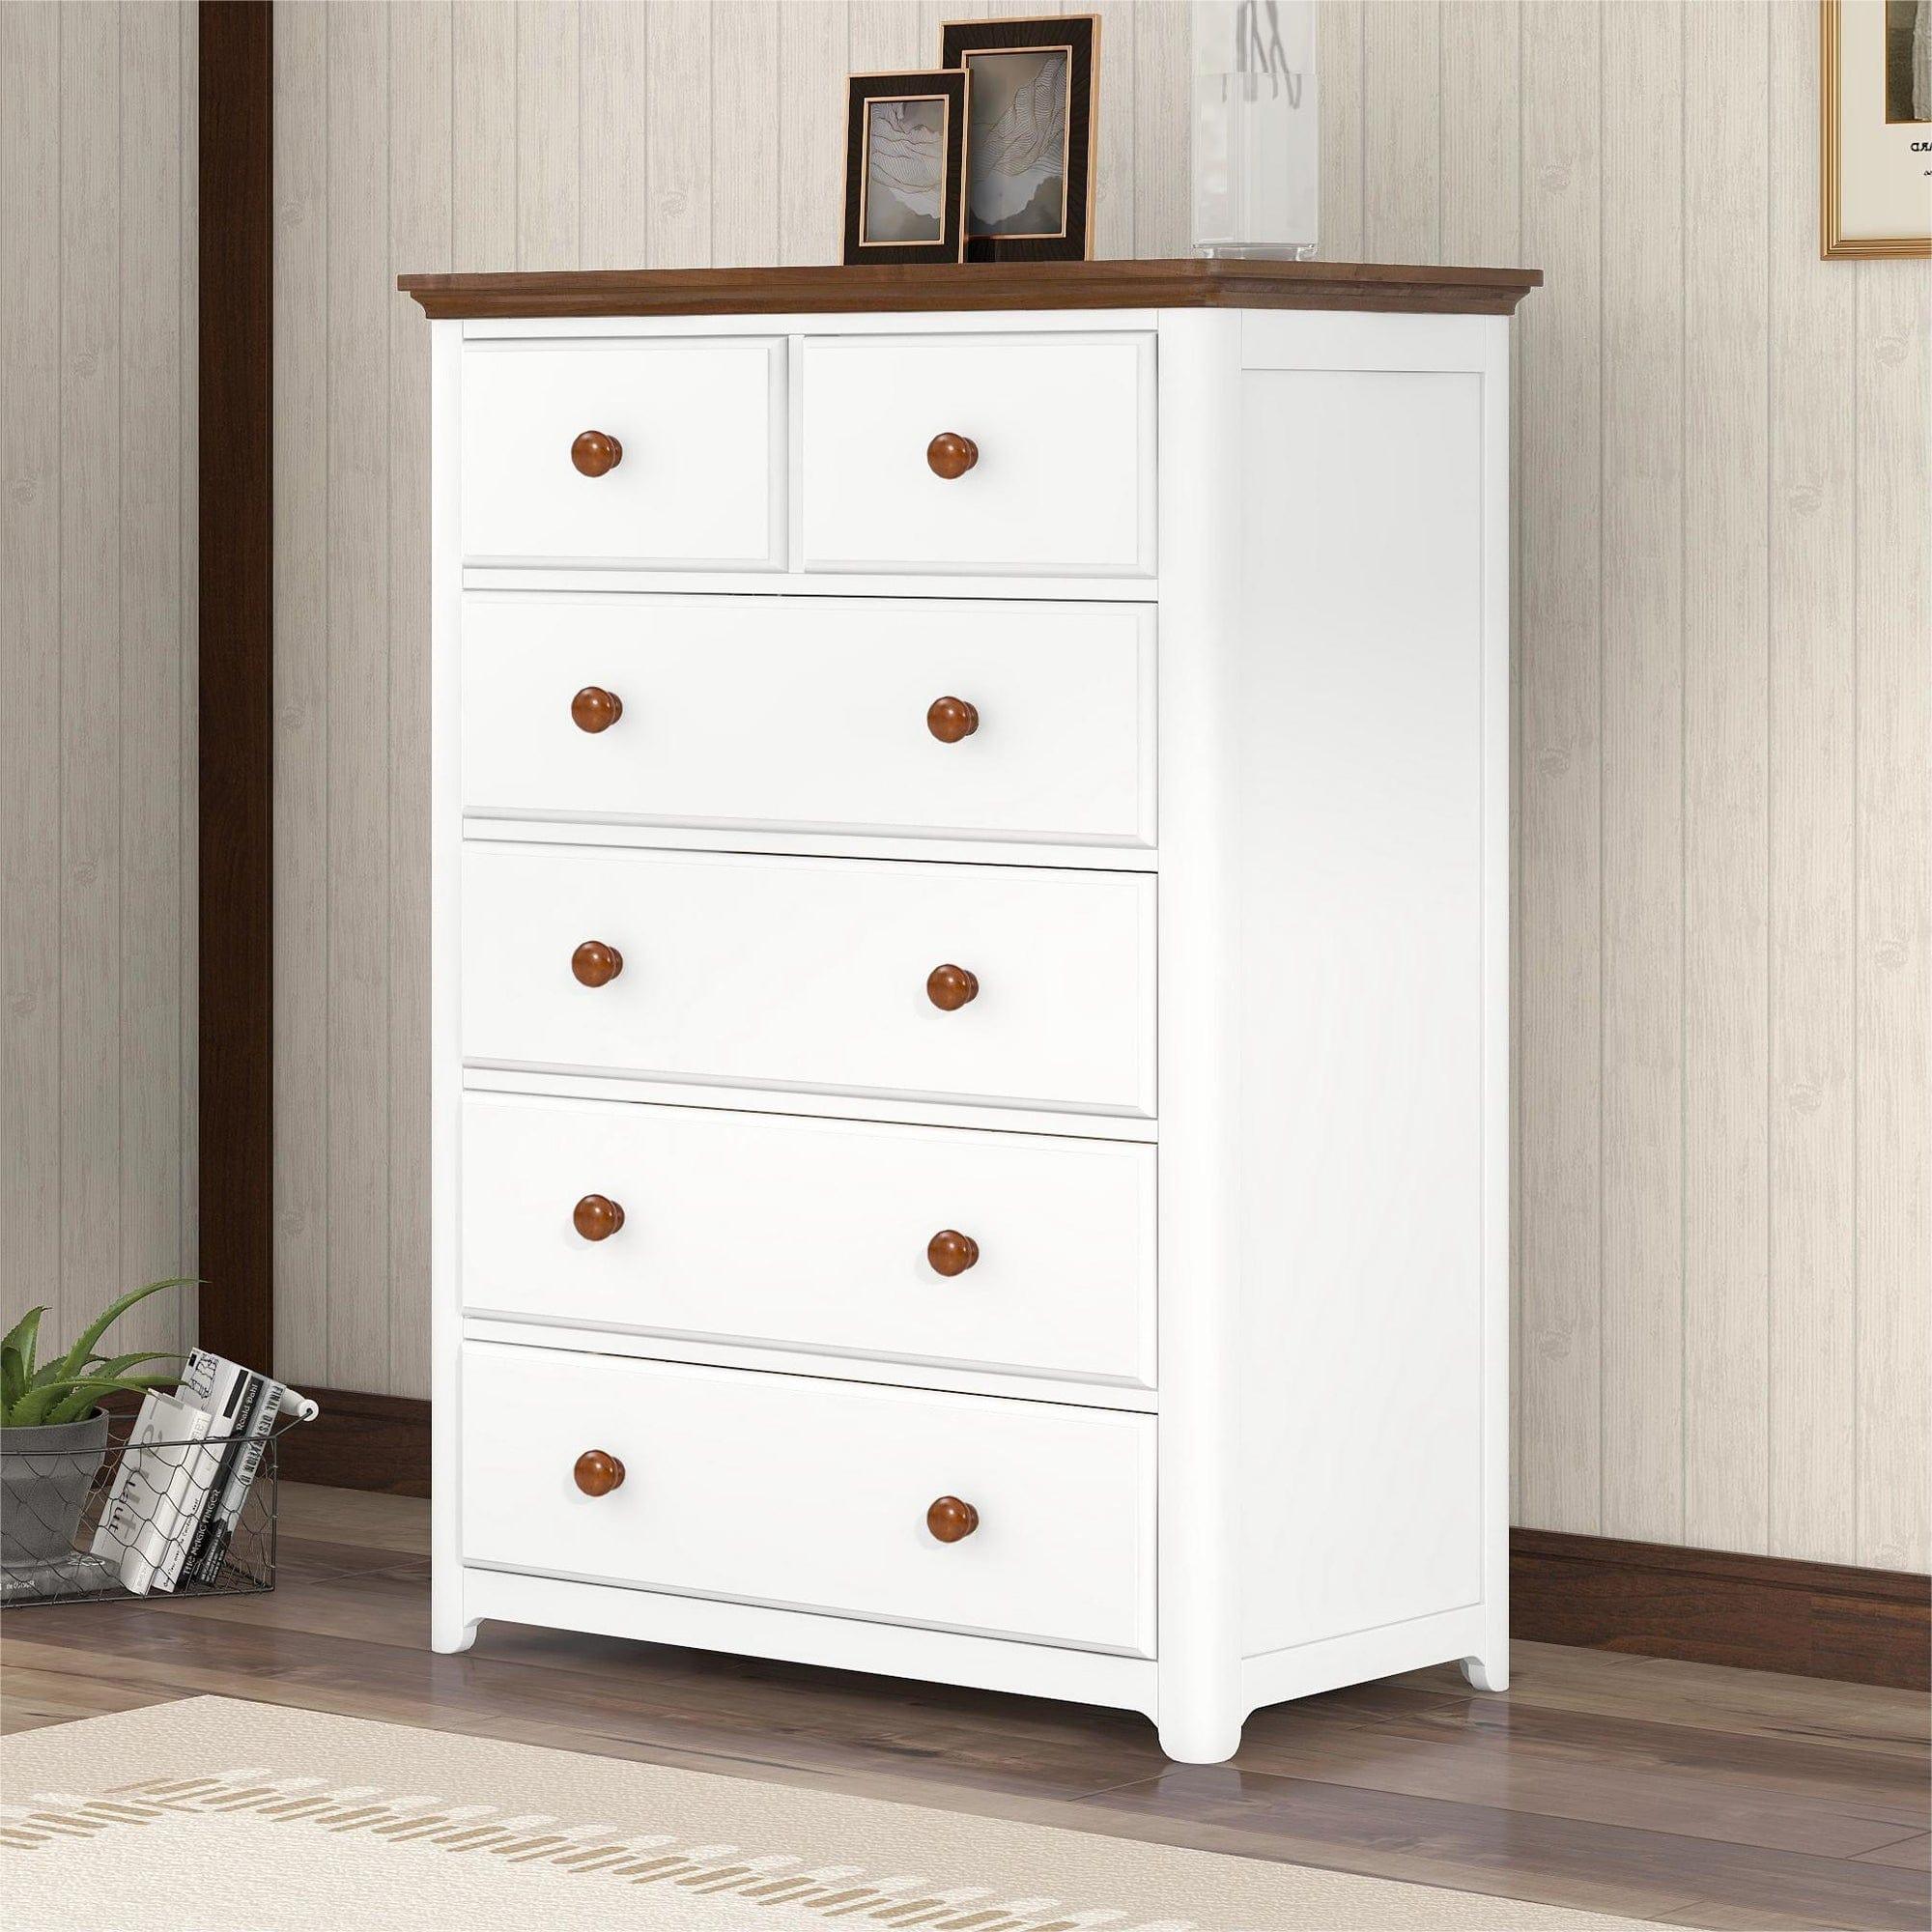 Shop Rustic Wooden Chest with 6 Drawers,Storage Cabinet for Bedroom,White+Walnut Mademoiselle Home Decor